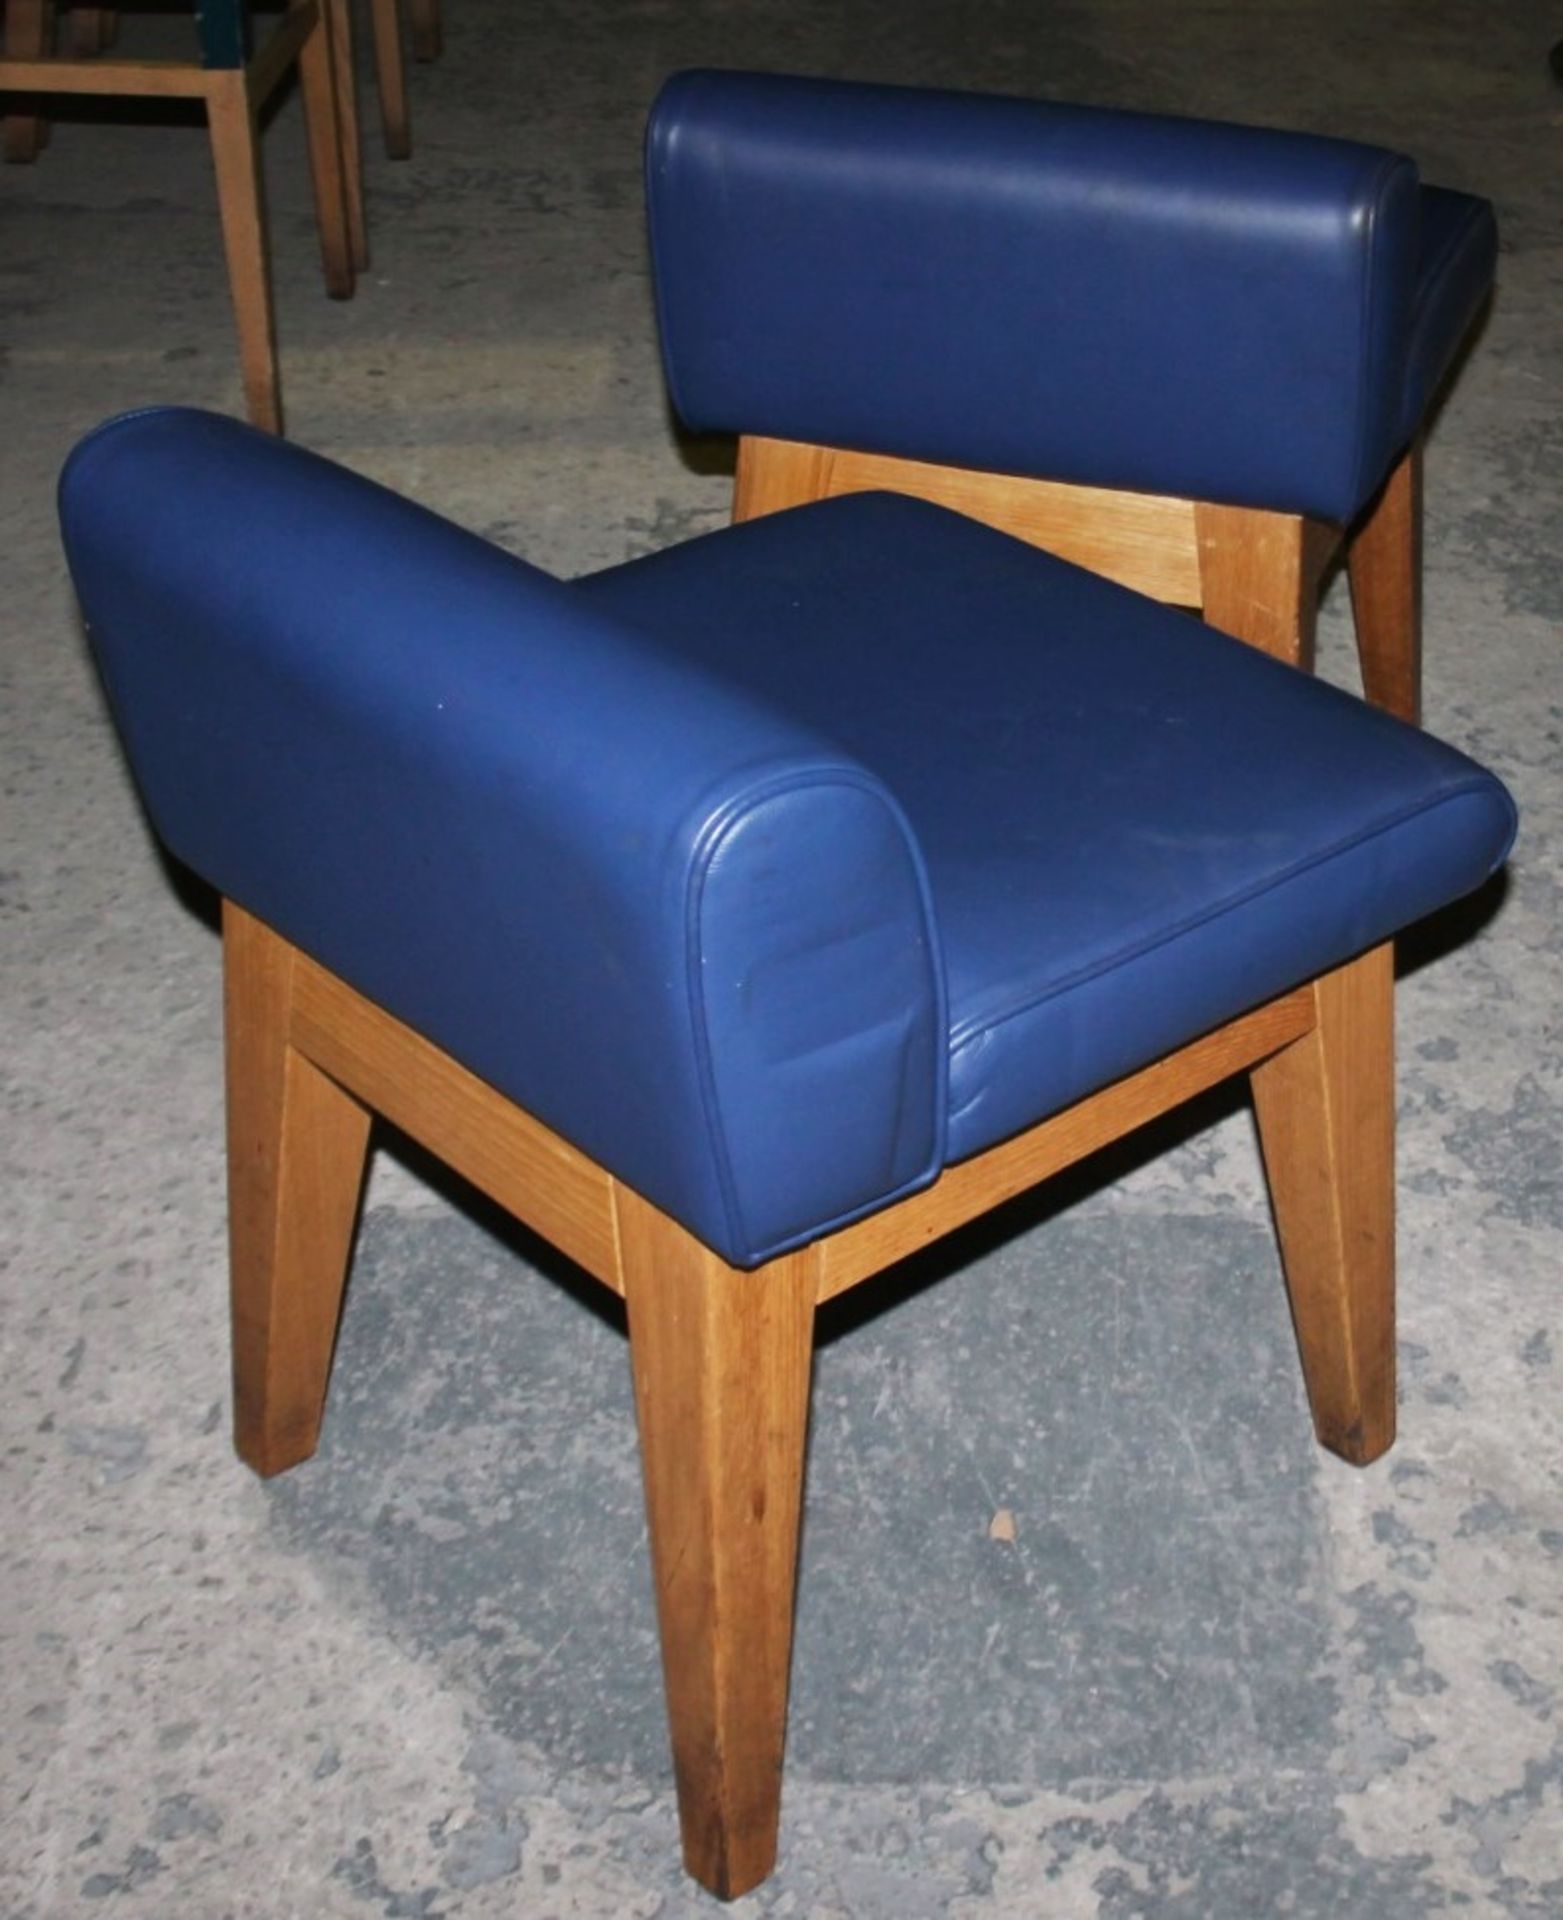 A Pair Of Stylish Low Back Restaurant Chairs With Bright Blue Faux Leather Upholstery - - Image 3 of 4